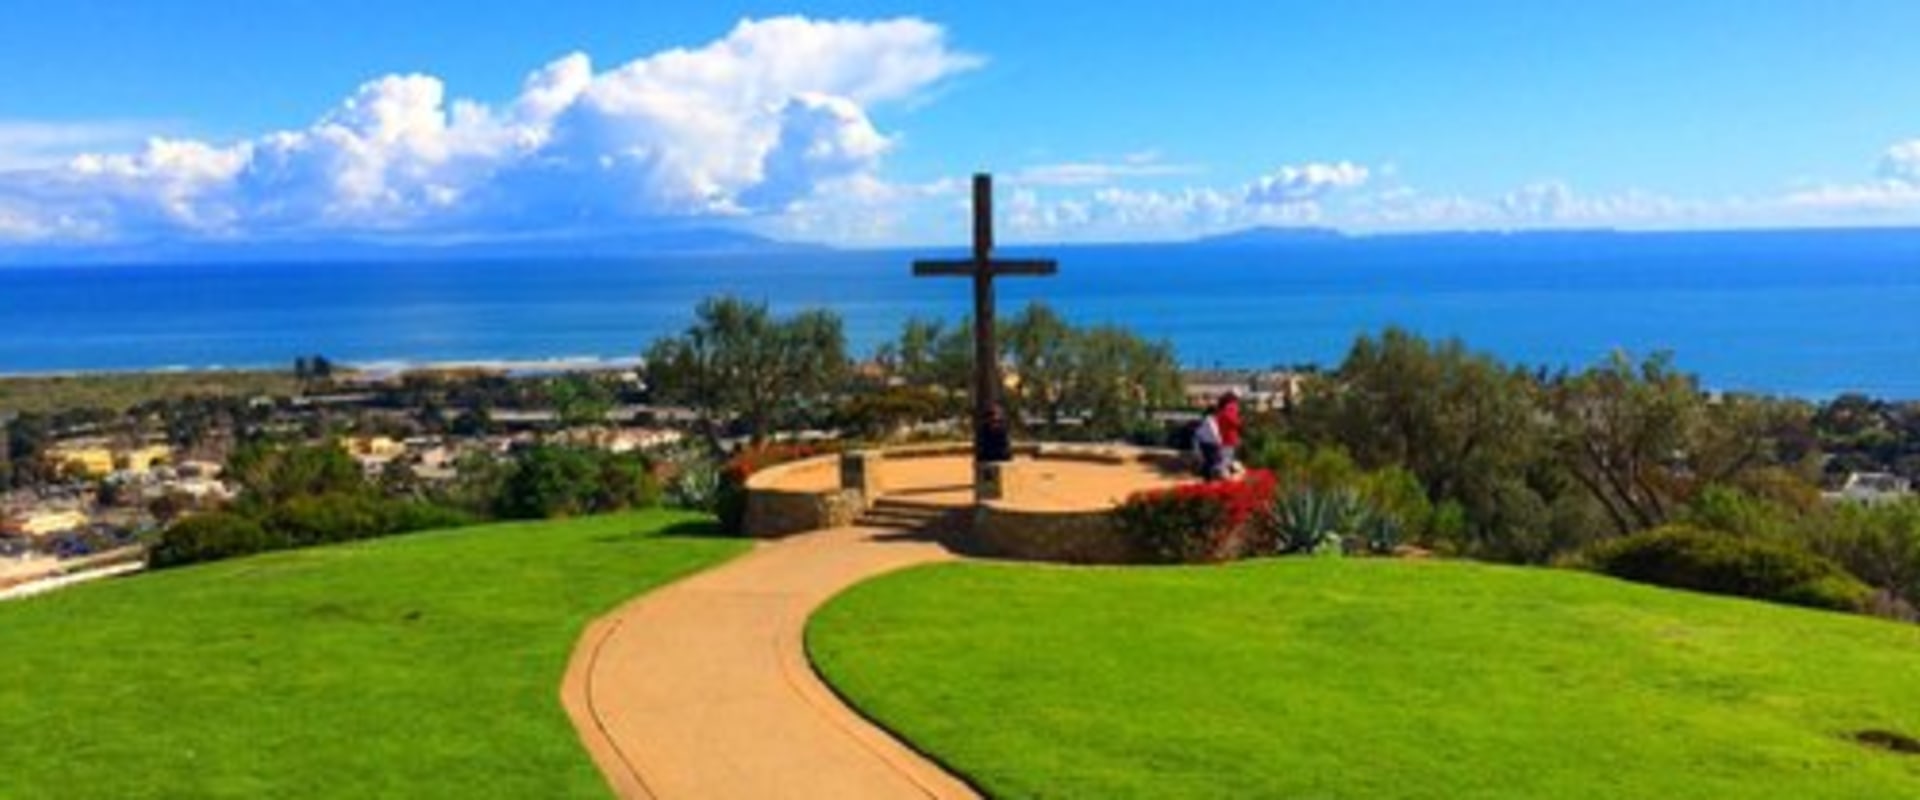 Exploring the Best Parks and Outdoor Recreation Areas in Ventura County, CA